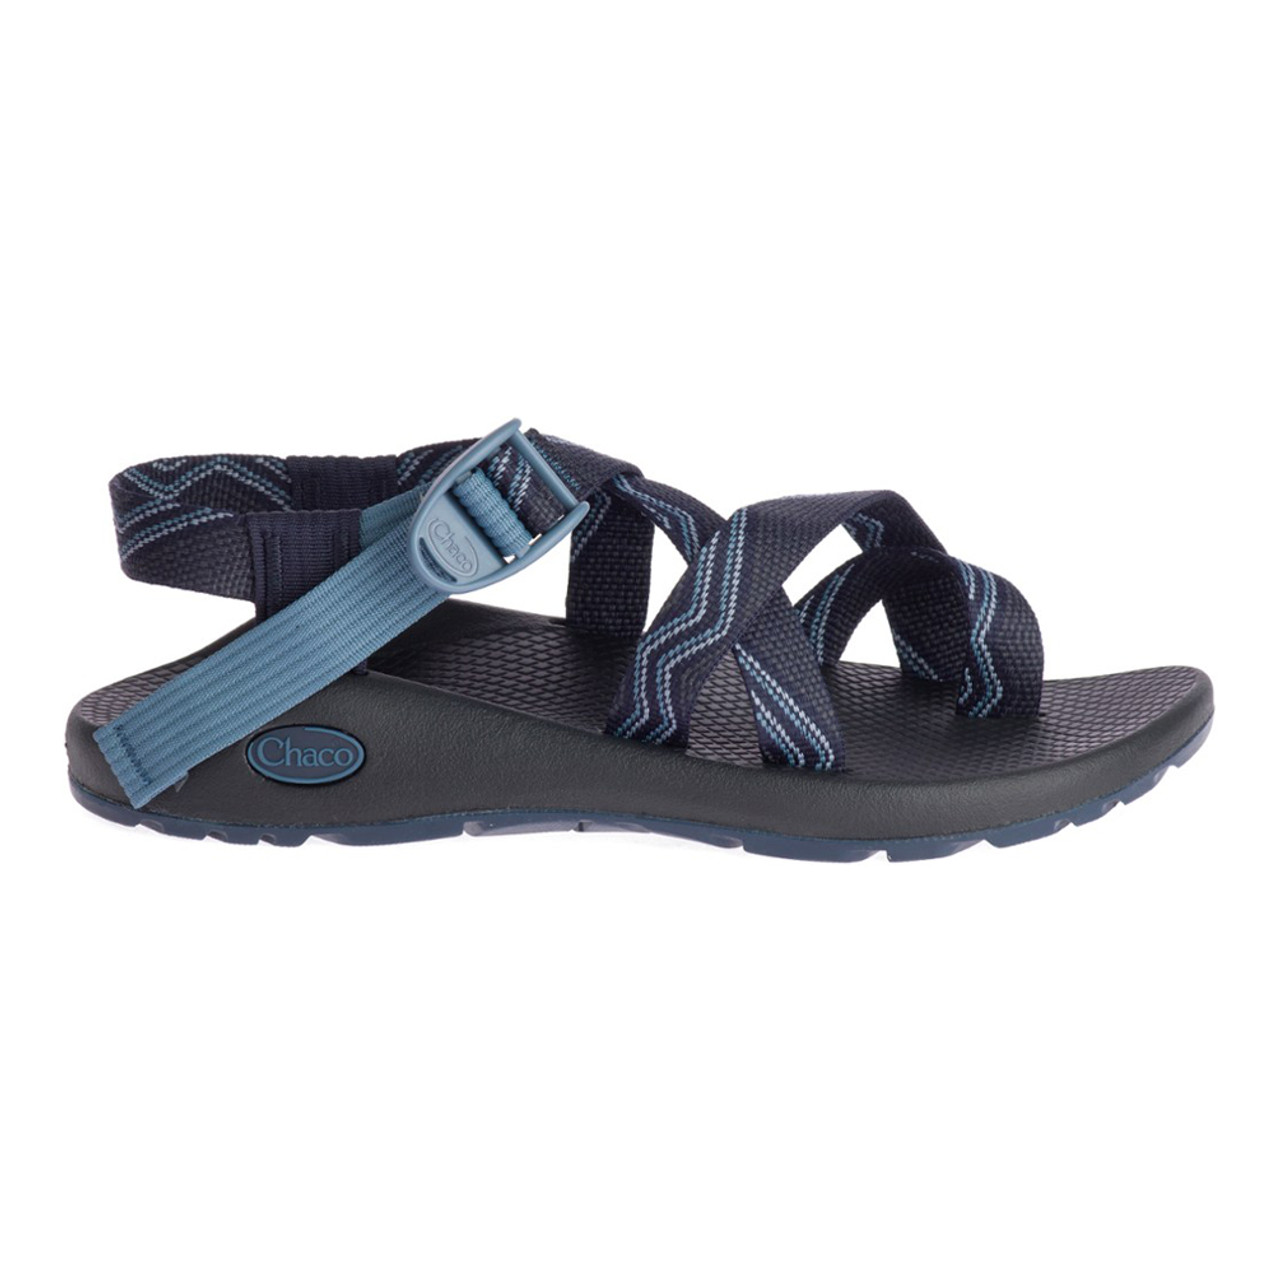 Chaco Women's Z2 Classic Sandal - Blue | Discount Chaco Ladies Sandals ...